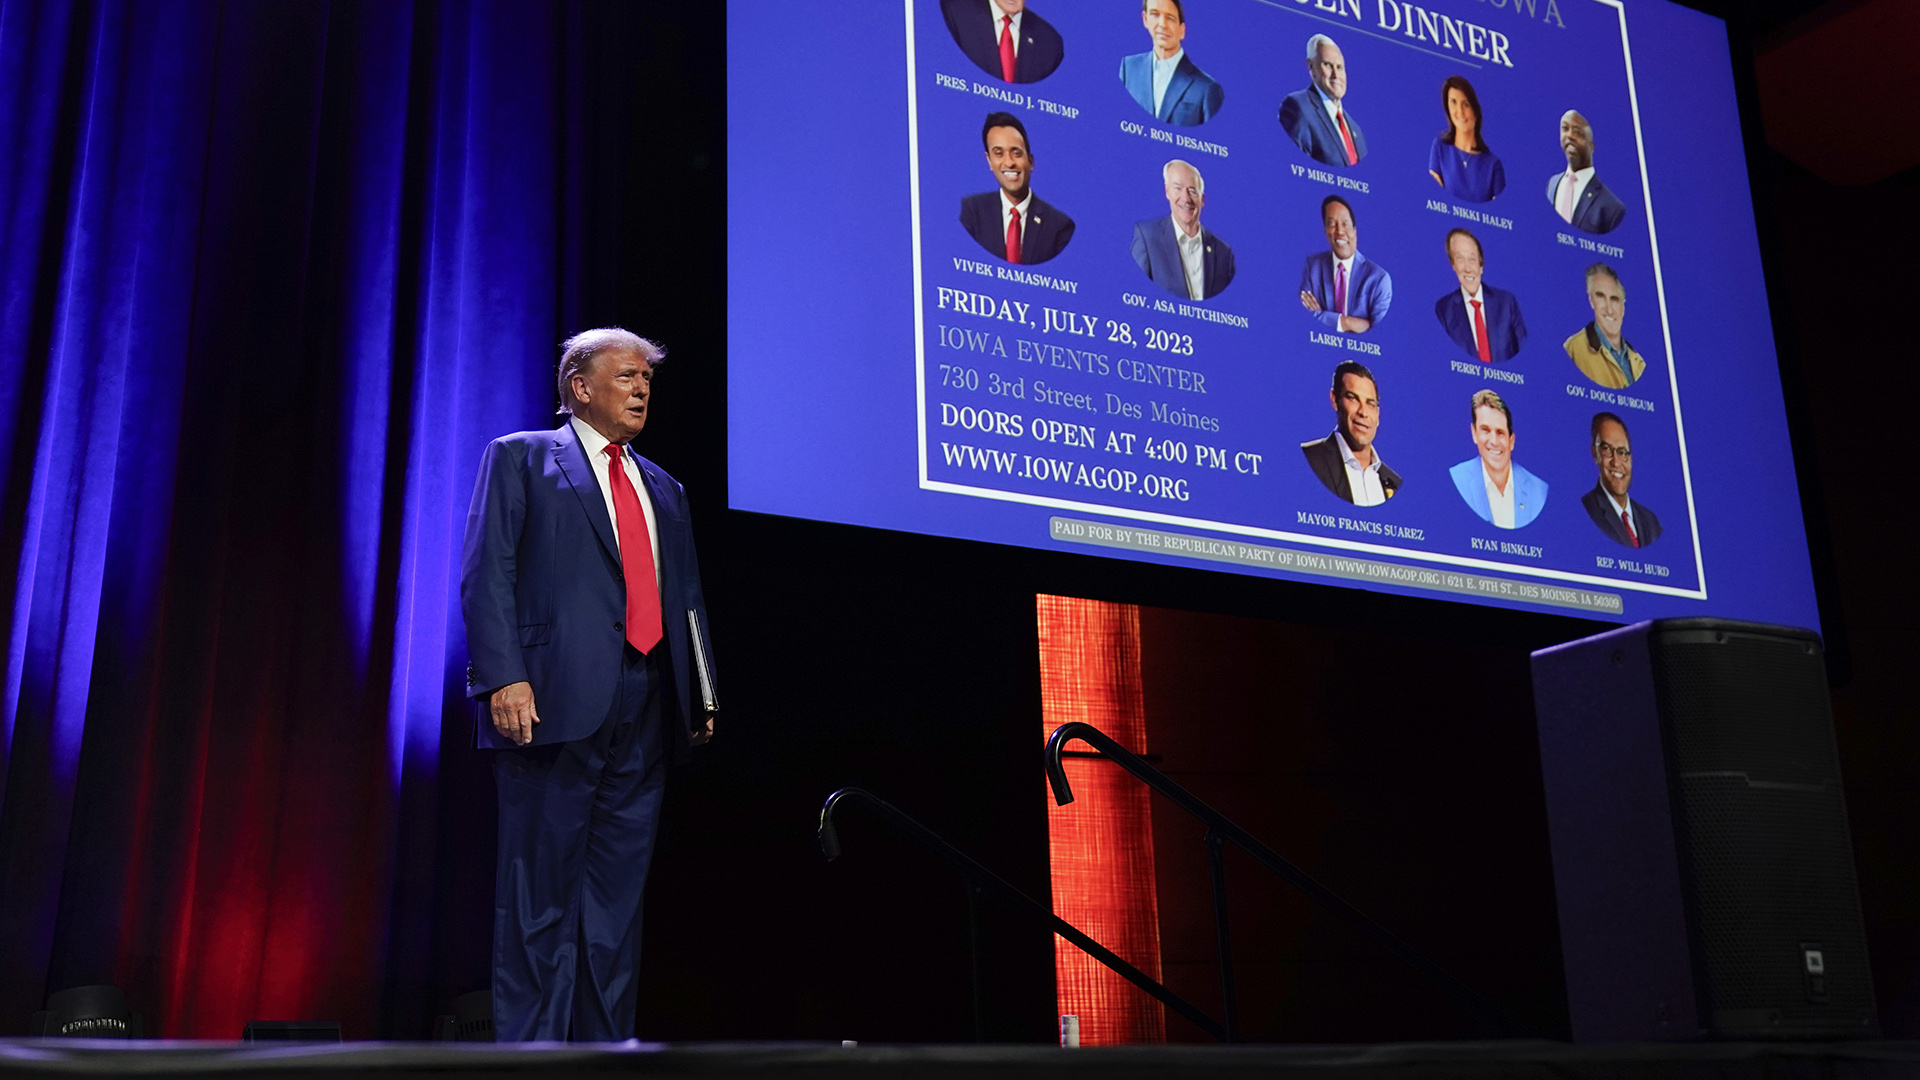 Donald Trump stands on a stage with a projector screen showing 13 candidates running in the 2024 Republican presidential primary, with a stage curtain in the background.